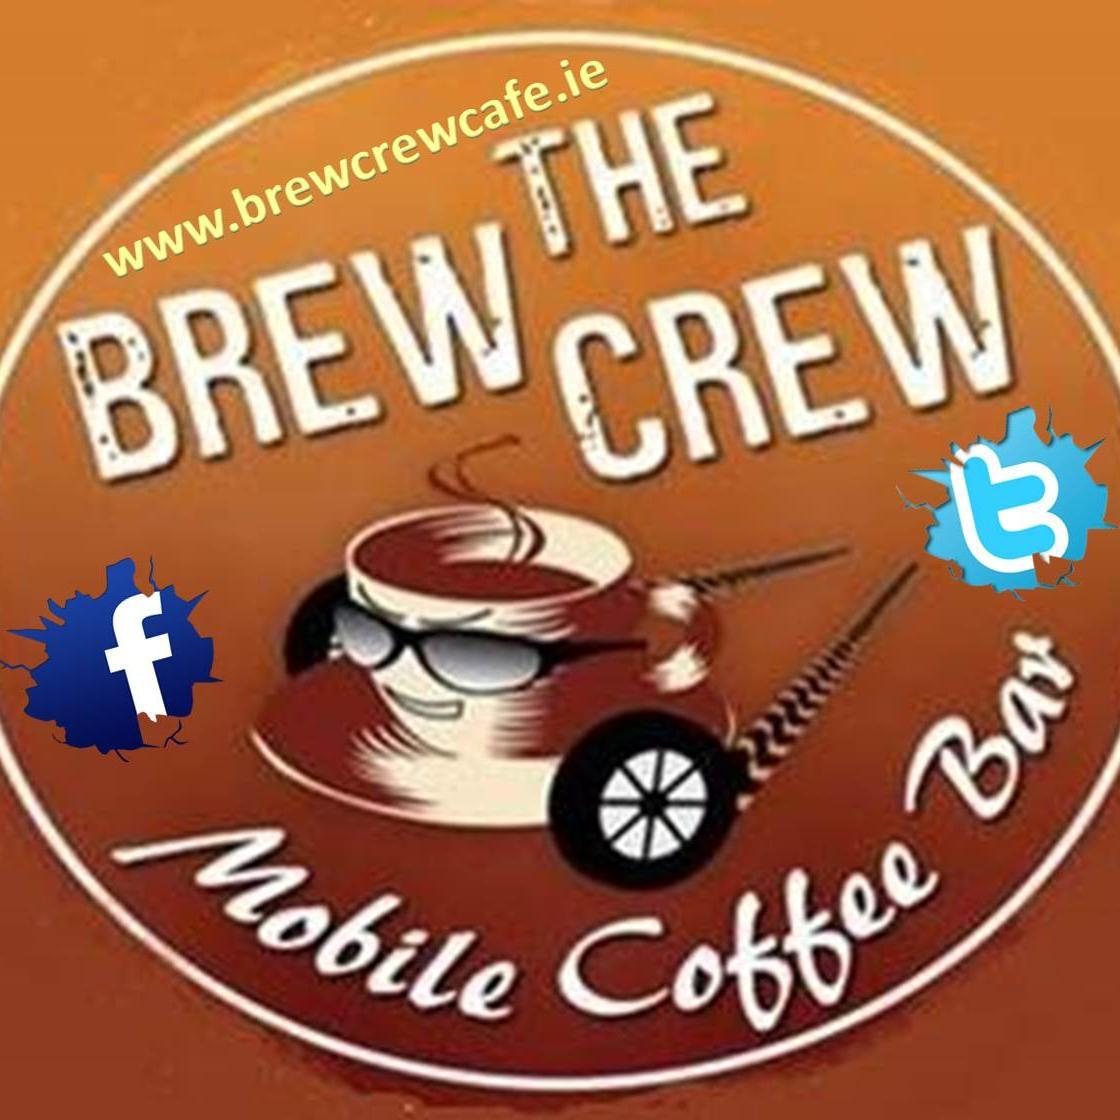 The Brew Crew are a progressive mobile catering business offering gourmet hot beverages.We are committed to providing a quality service to our customers.